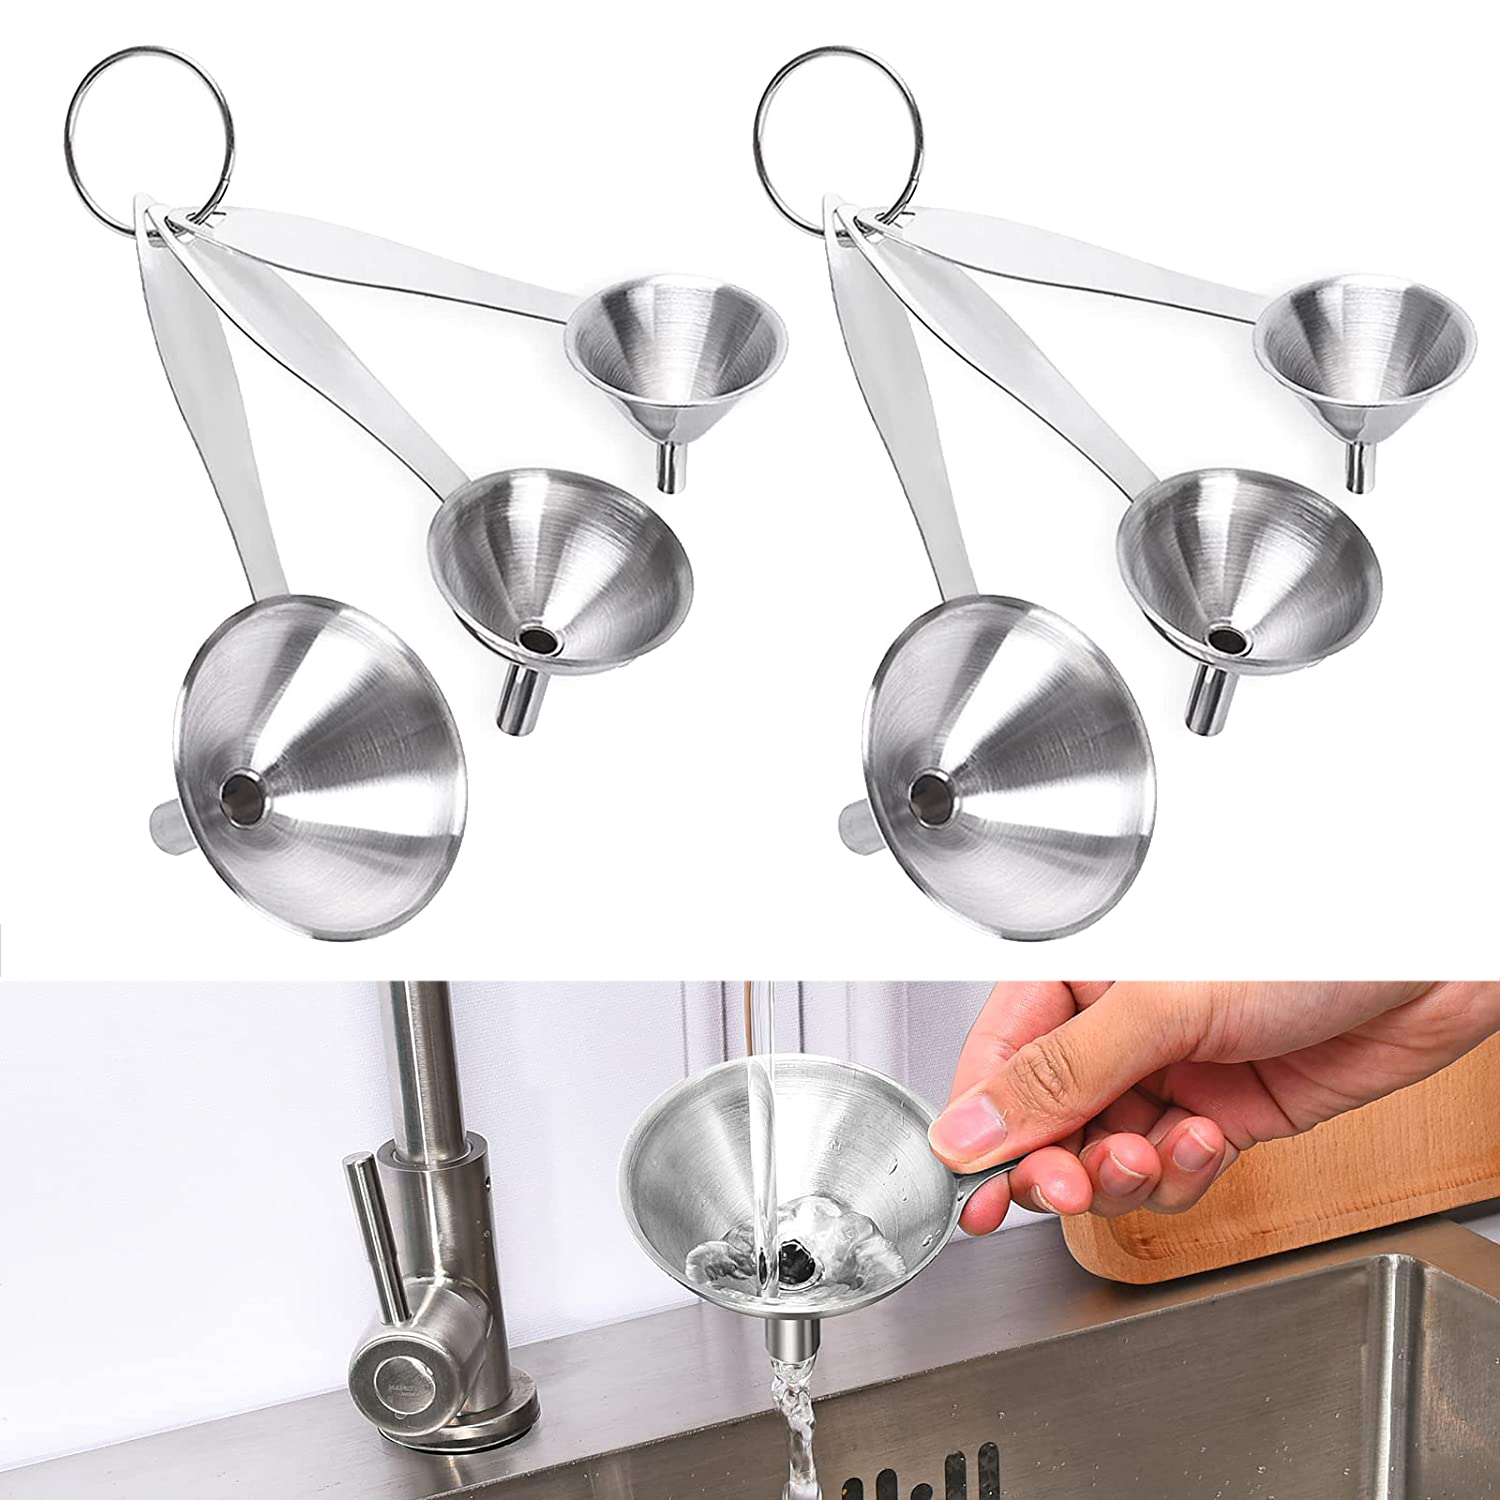 2Pack 3 in 1 Metal Funnels for Filling Bottles Stainless Steel Small  Kitchen Funnel Set for Transferring Essential Oils Liquid Fluid Spice Dry  Ingredients Powder, Durable and Dishwash Safe 